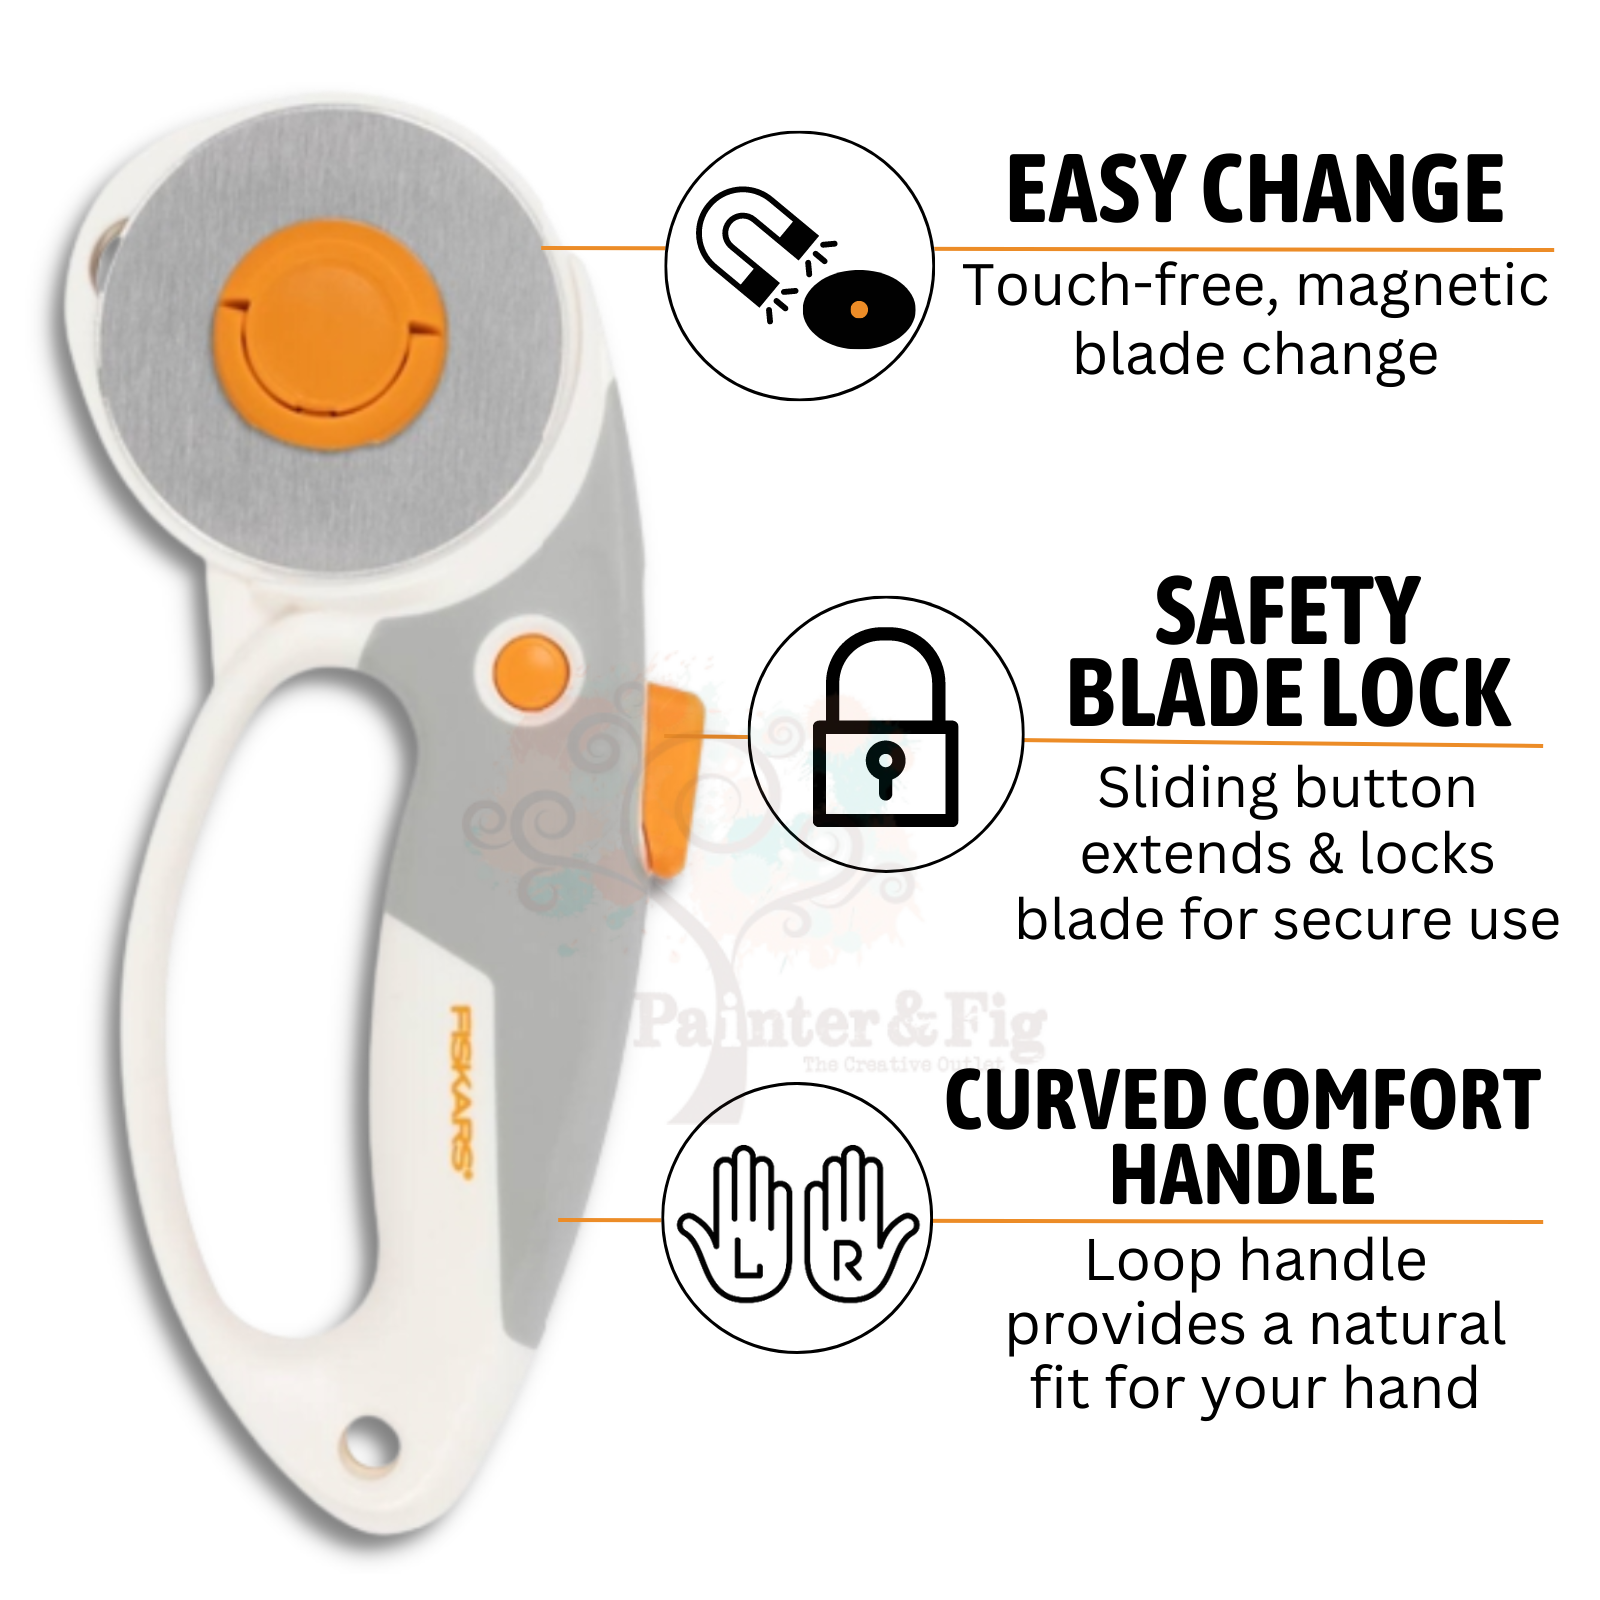 Fiskars 45 mm, 60 mm Rotary Cutter Blade, Easy Change DuoLoop - 2 rotary cutters in one